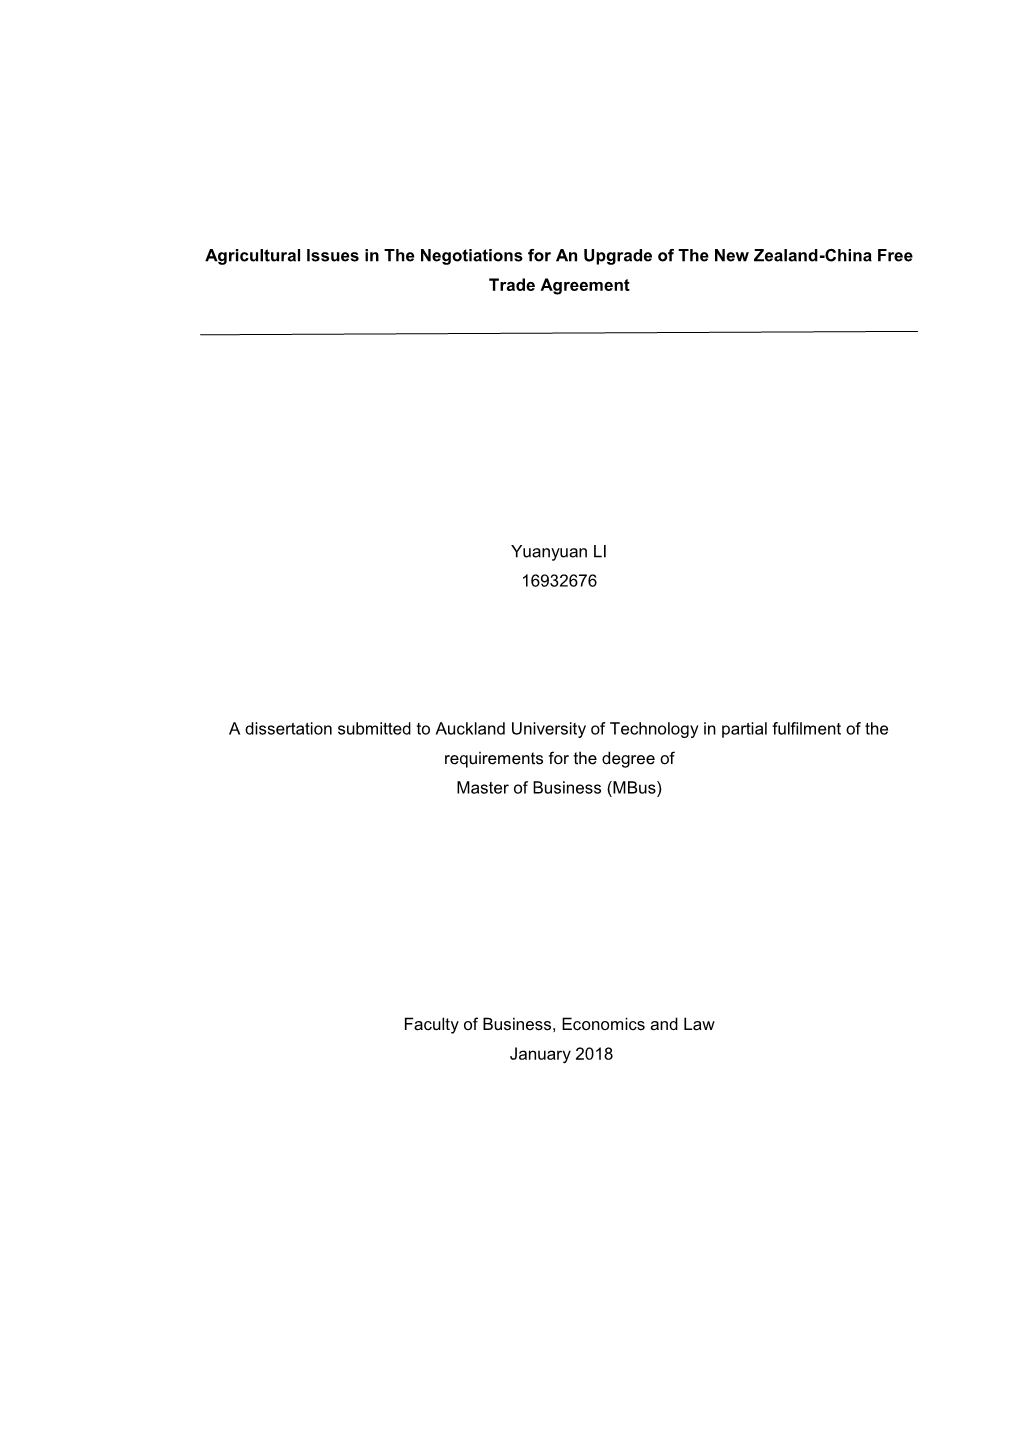 Agricultural Issues in the Negotiations for an Upgrade of the New Zealand-China Free Trade Agreement Yuanyuan LI 16932676 a Diss